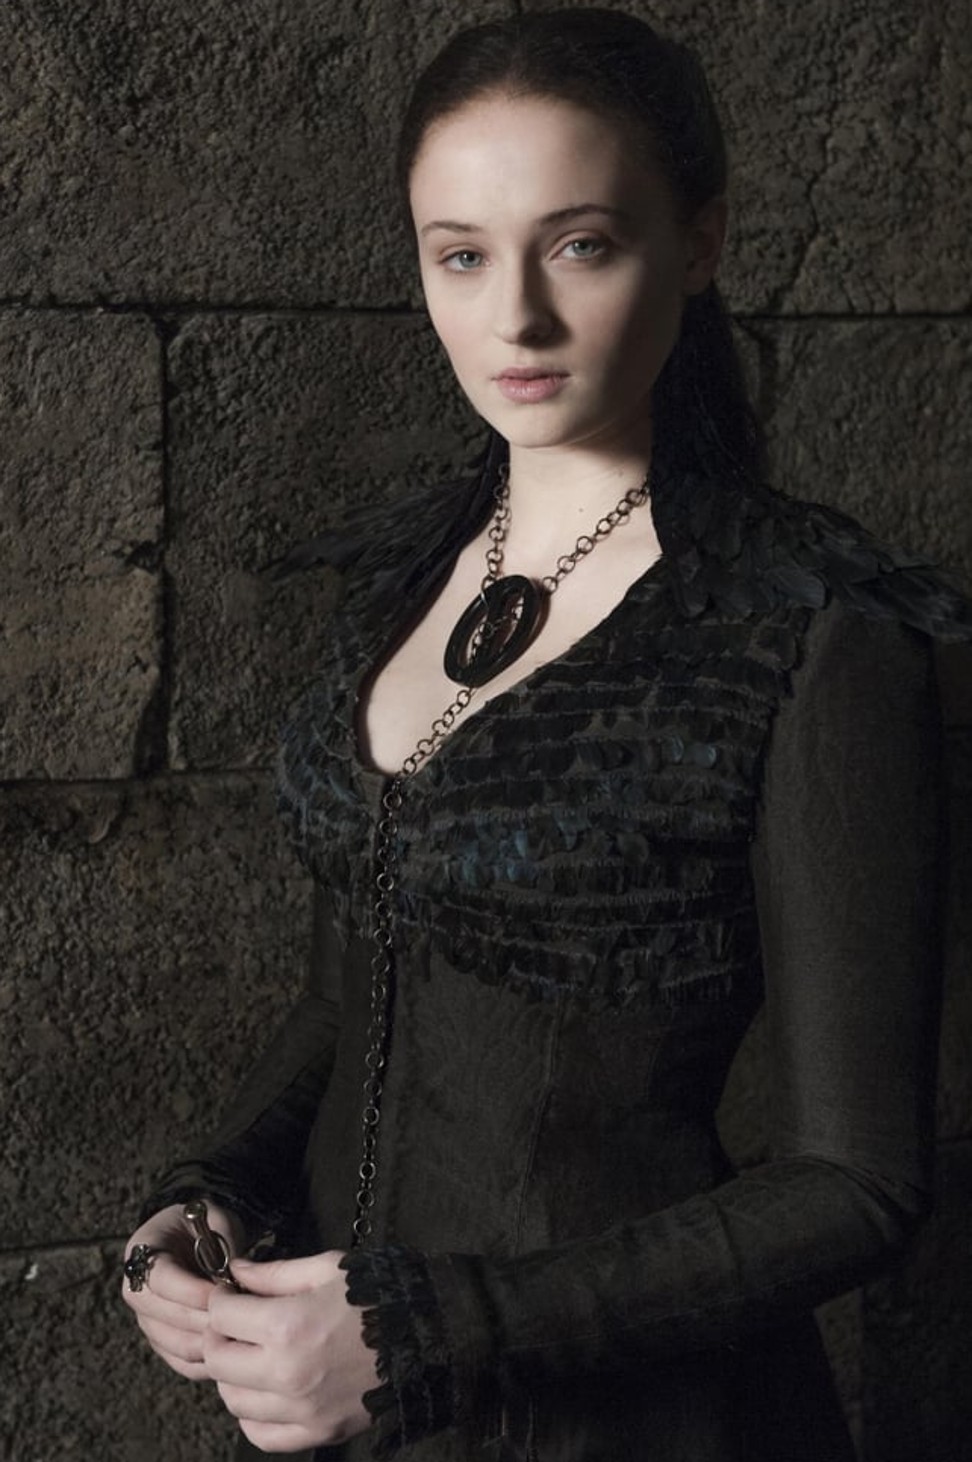 The iconic dark dress, with a feather-covered bodice and winged sleeves, worn by Sophie Turner as Sansa Stark in Game of Thrones.